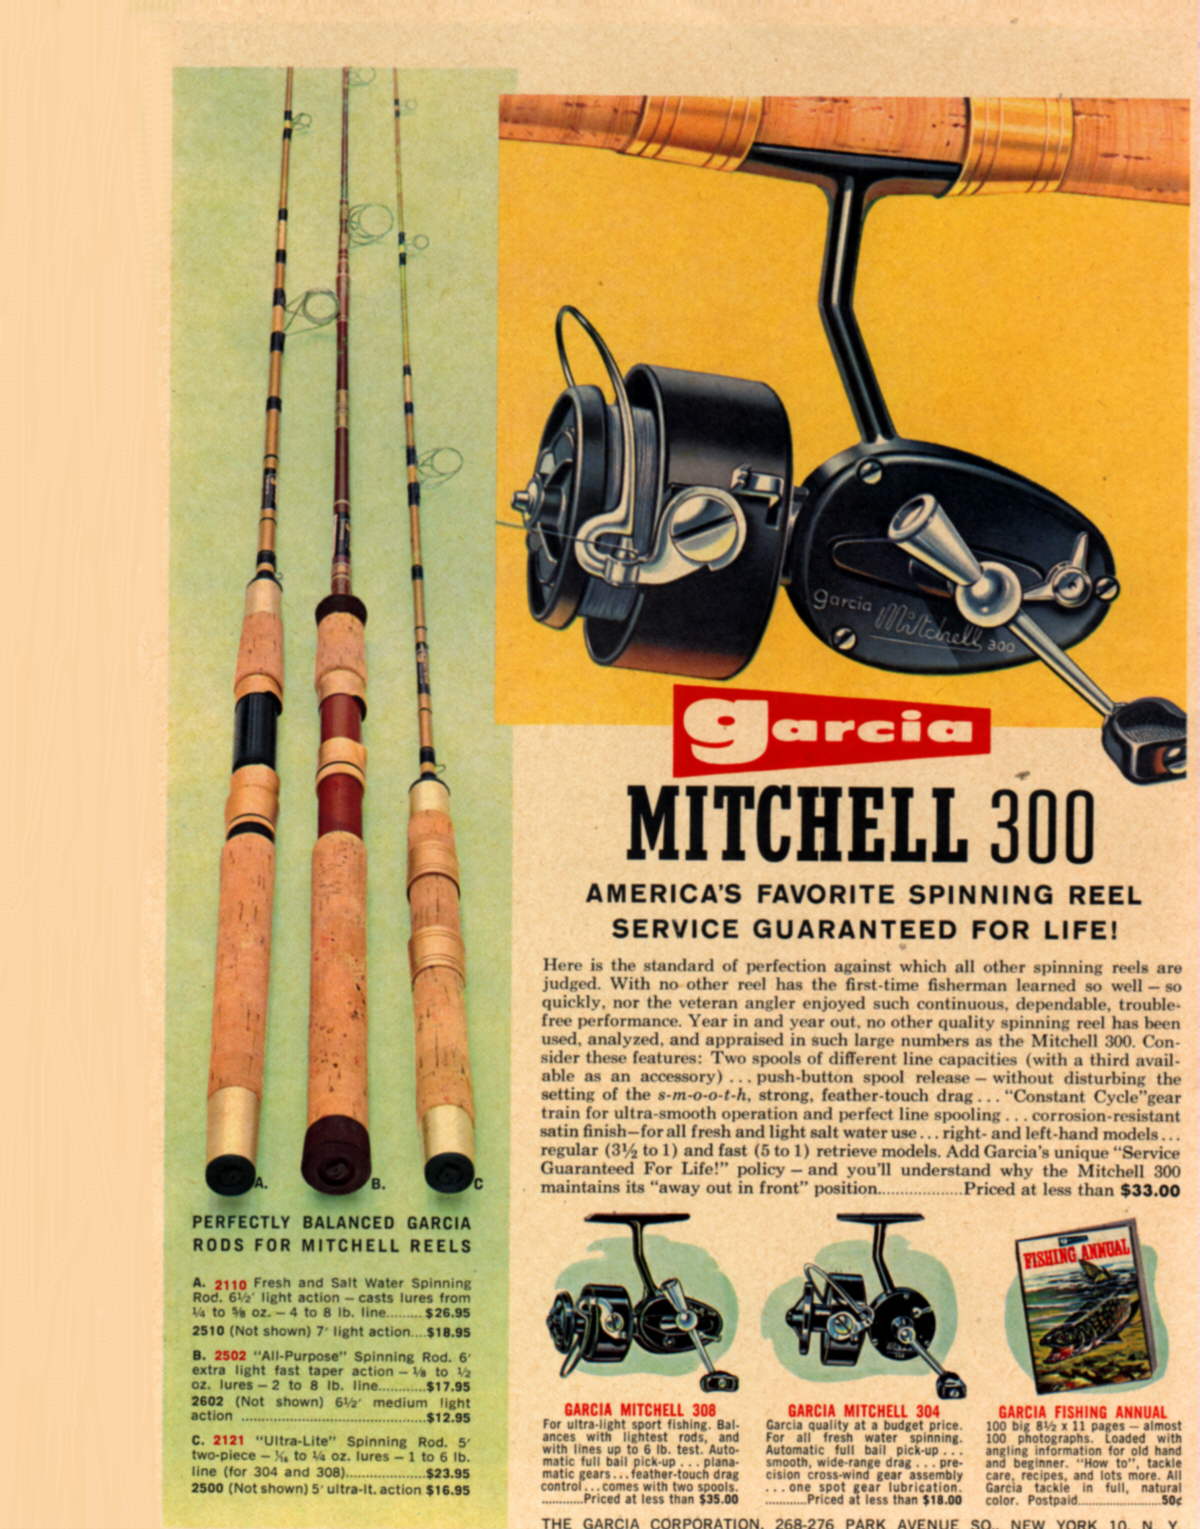 Early Garcia Mitchell 300 Full Bail Spinning Reel